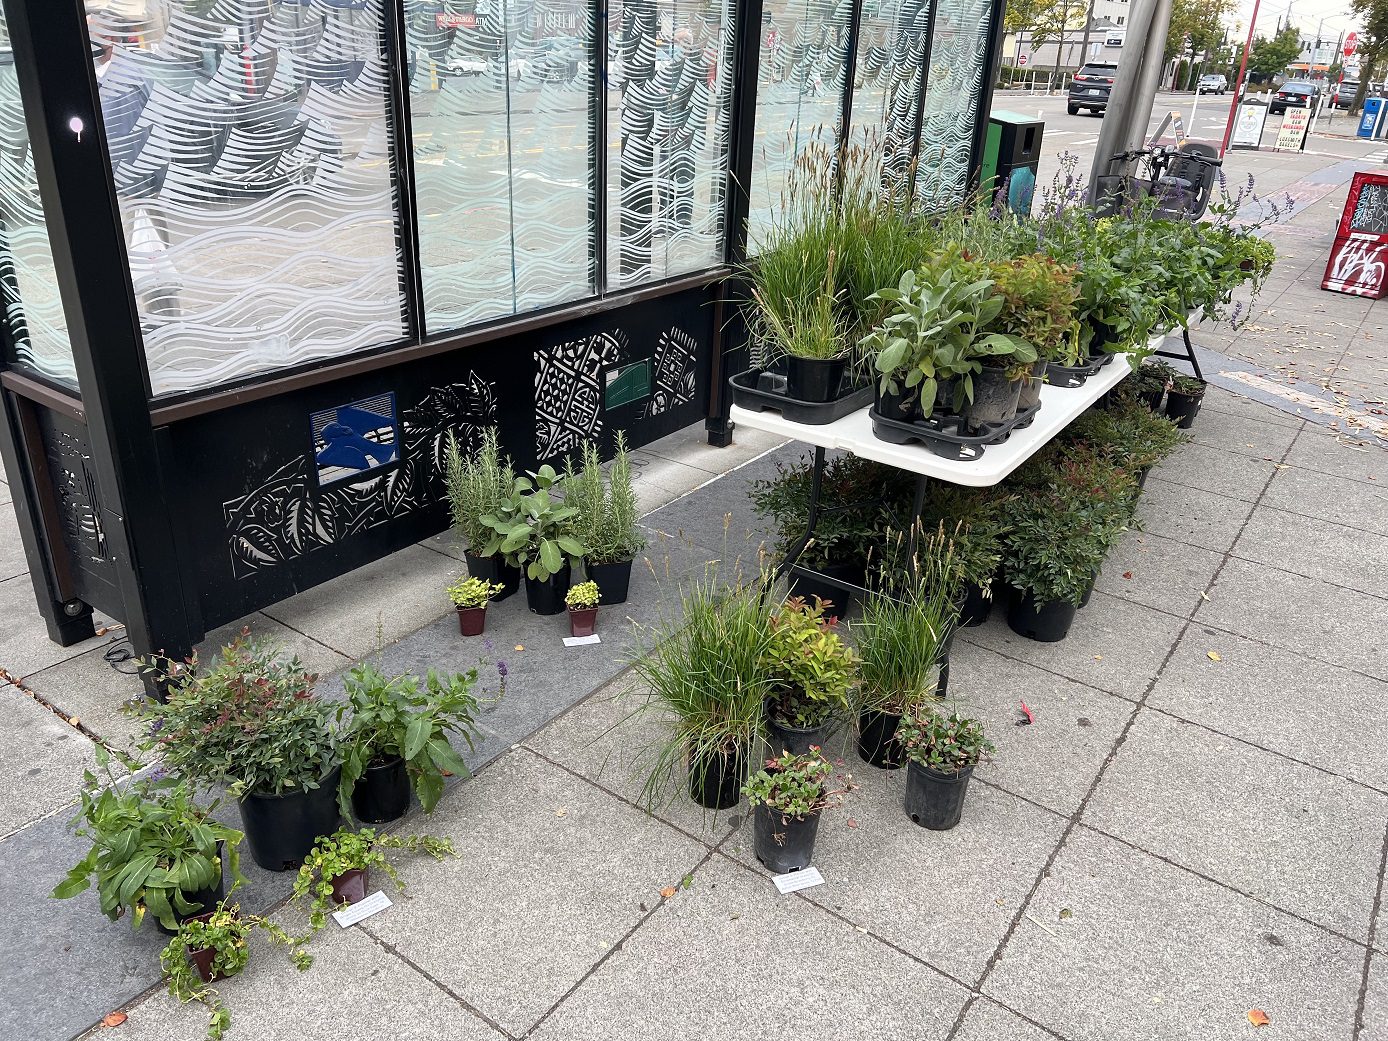 A wide variety of potted plants along a sidewalk near a bus stop.